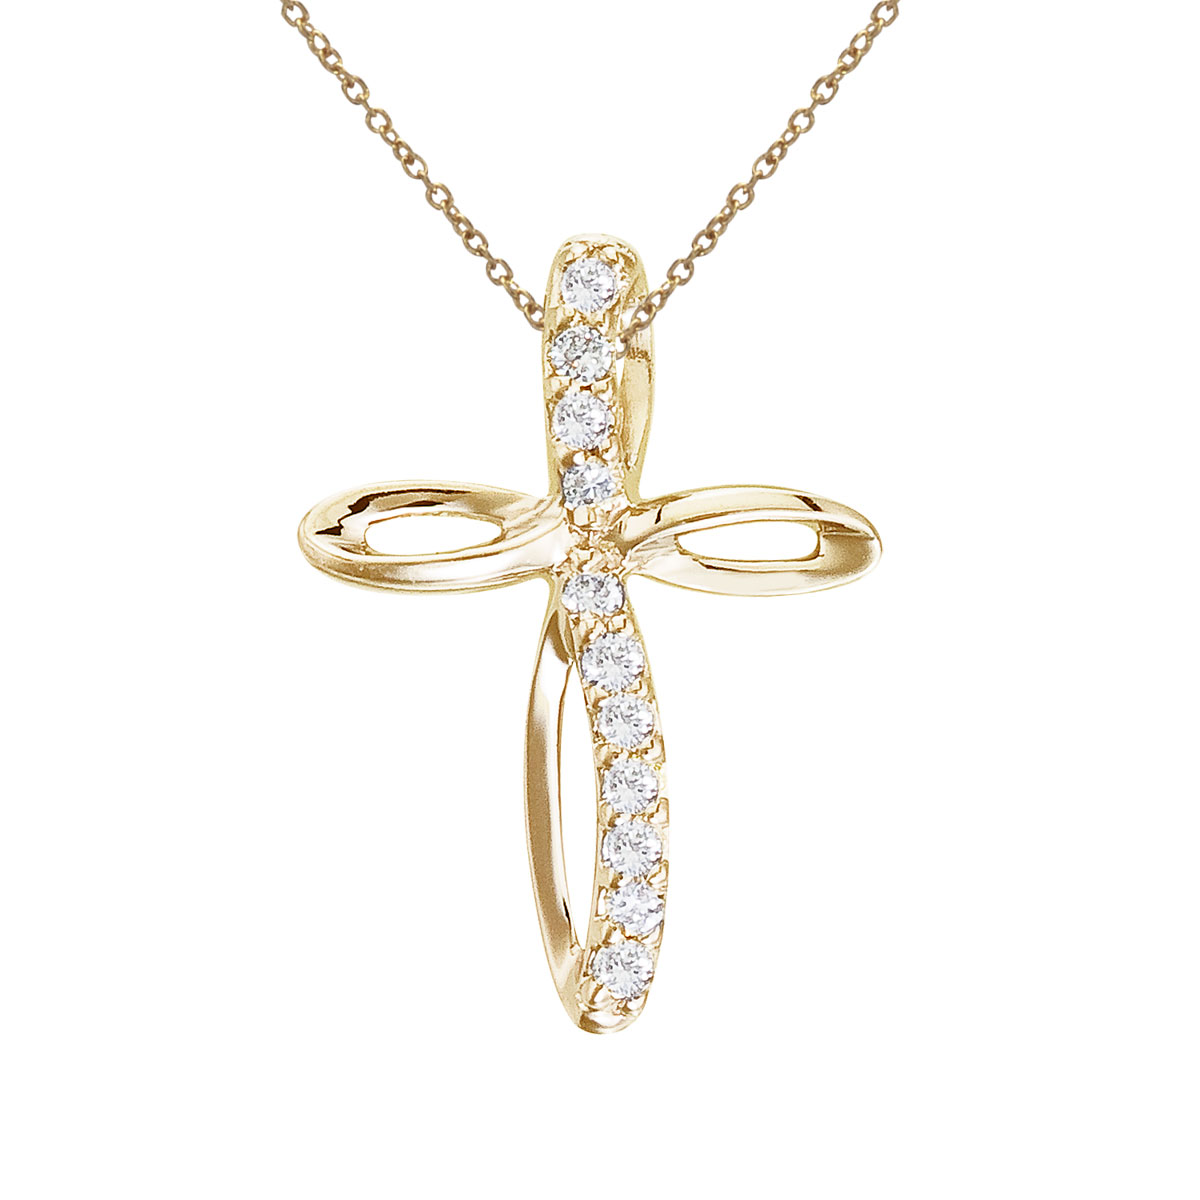 14k yellow gold cross pendant with shimmering diamonds.